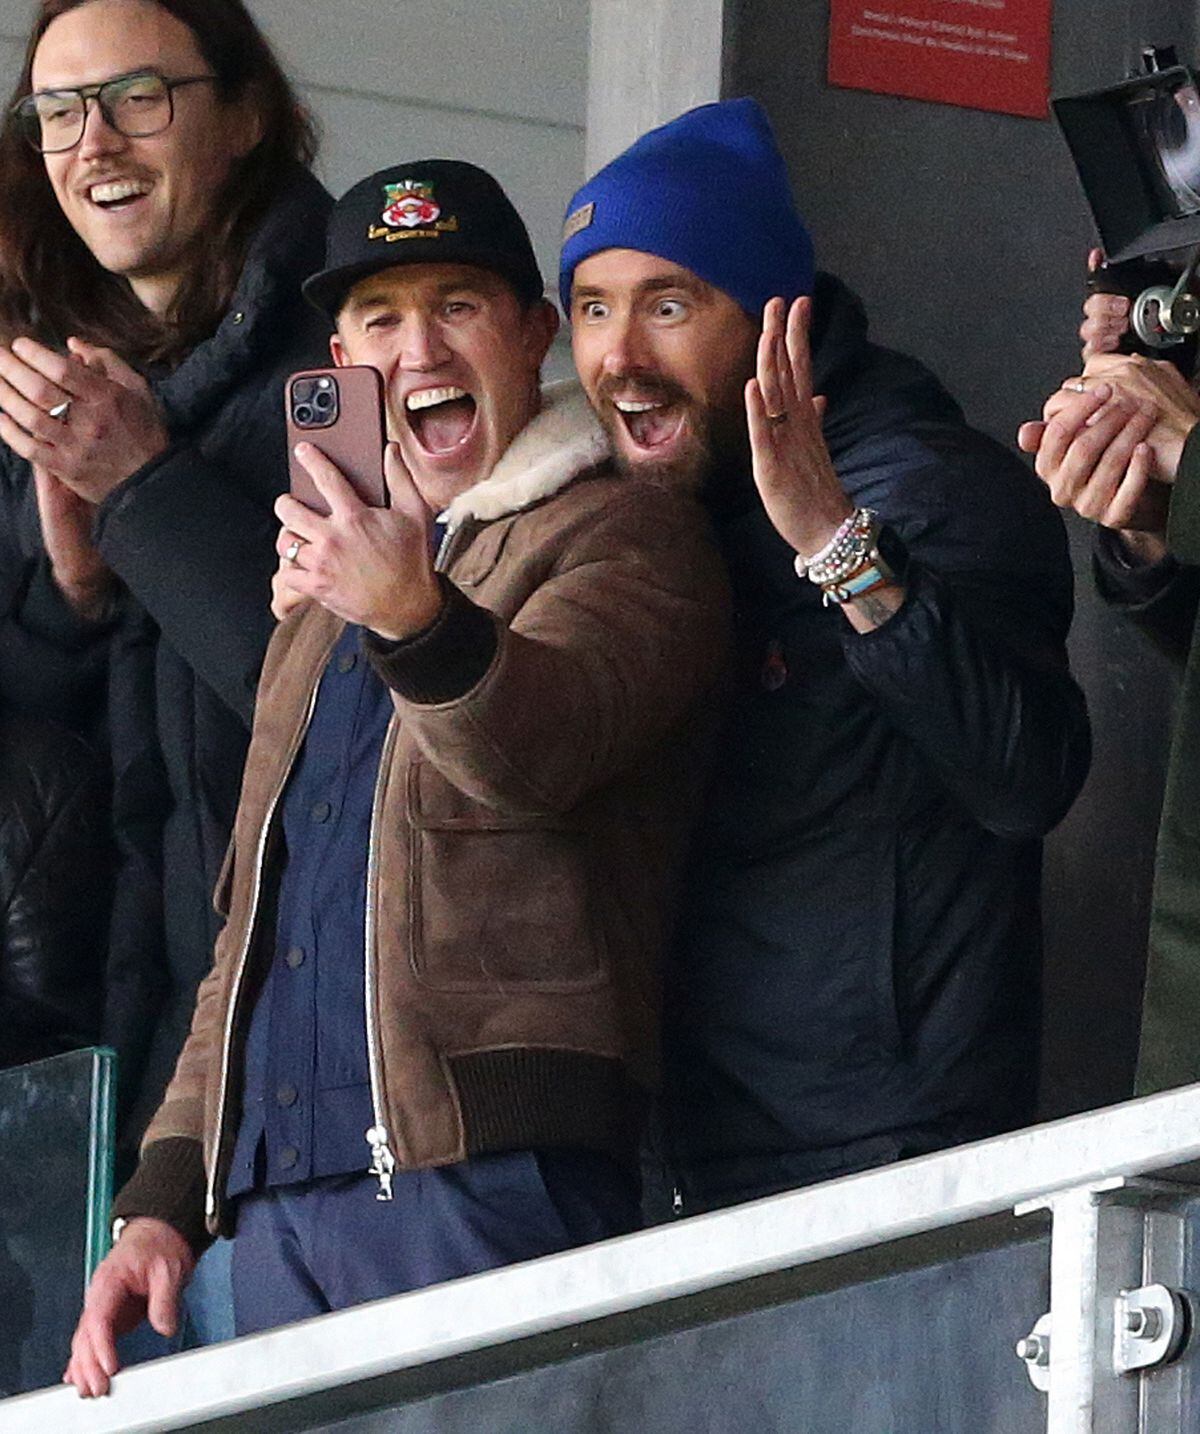 Rob McElhenney and Ryan Reynolds at the game vs Boreham Wood on the weekend.